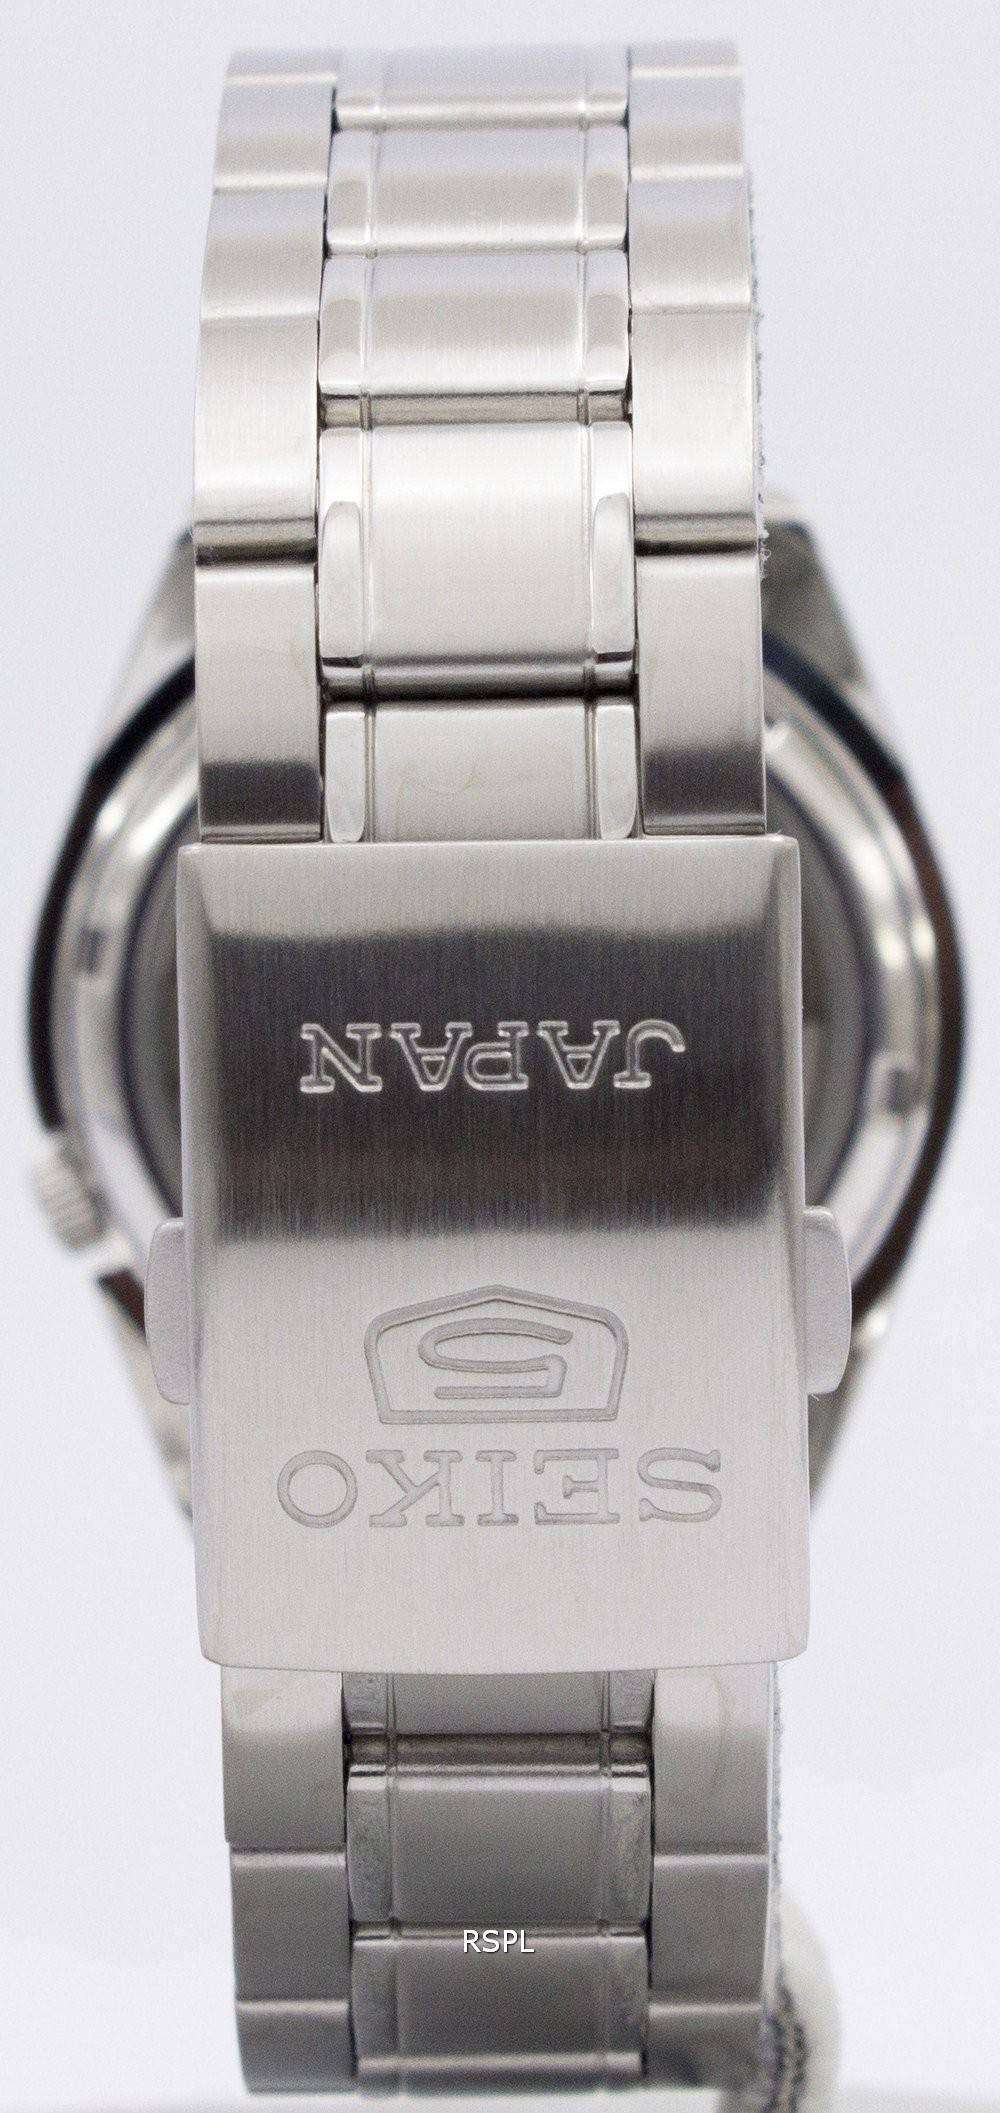 KB ANTIQUES WATCH SALE - The Seiko SNK watch now gets a luxury tag. It is still a tool and brings in some very retro style in its looks.